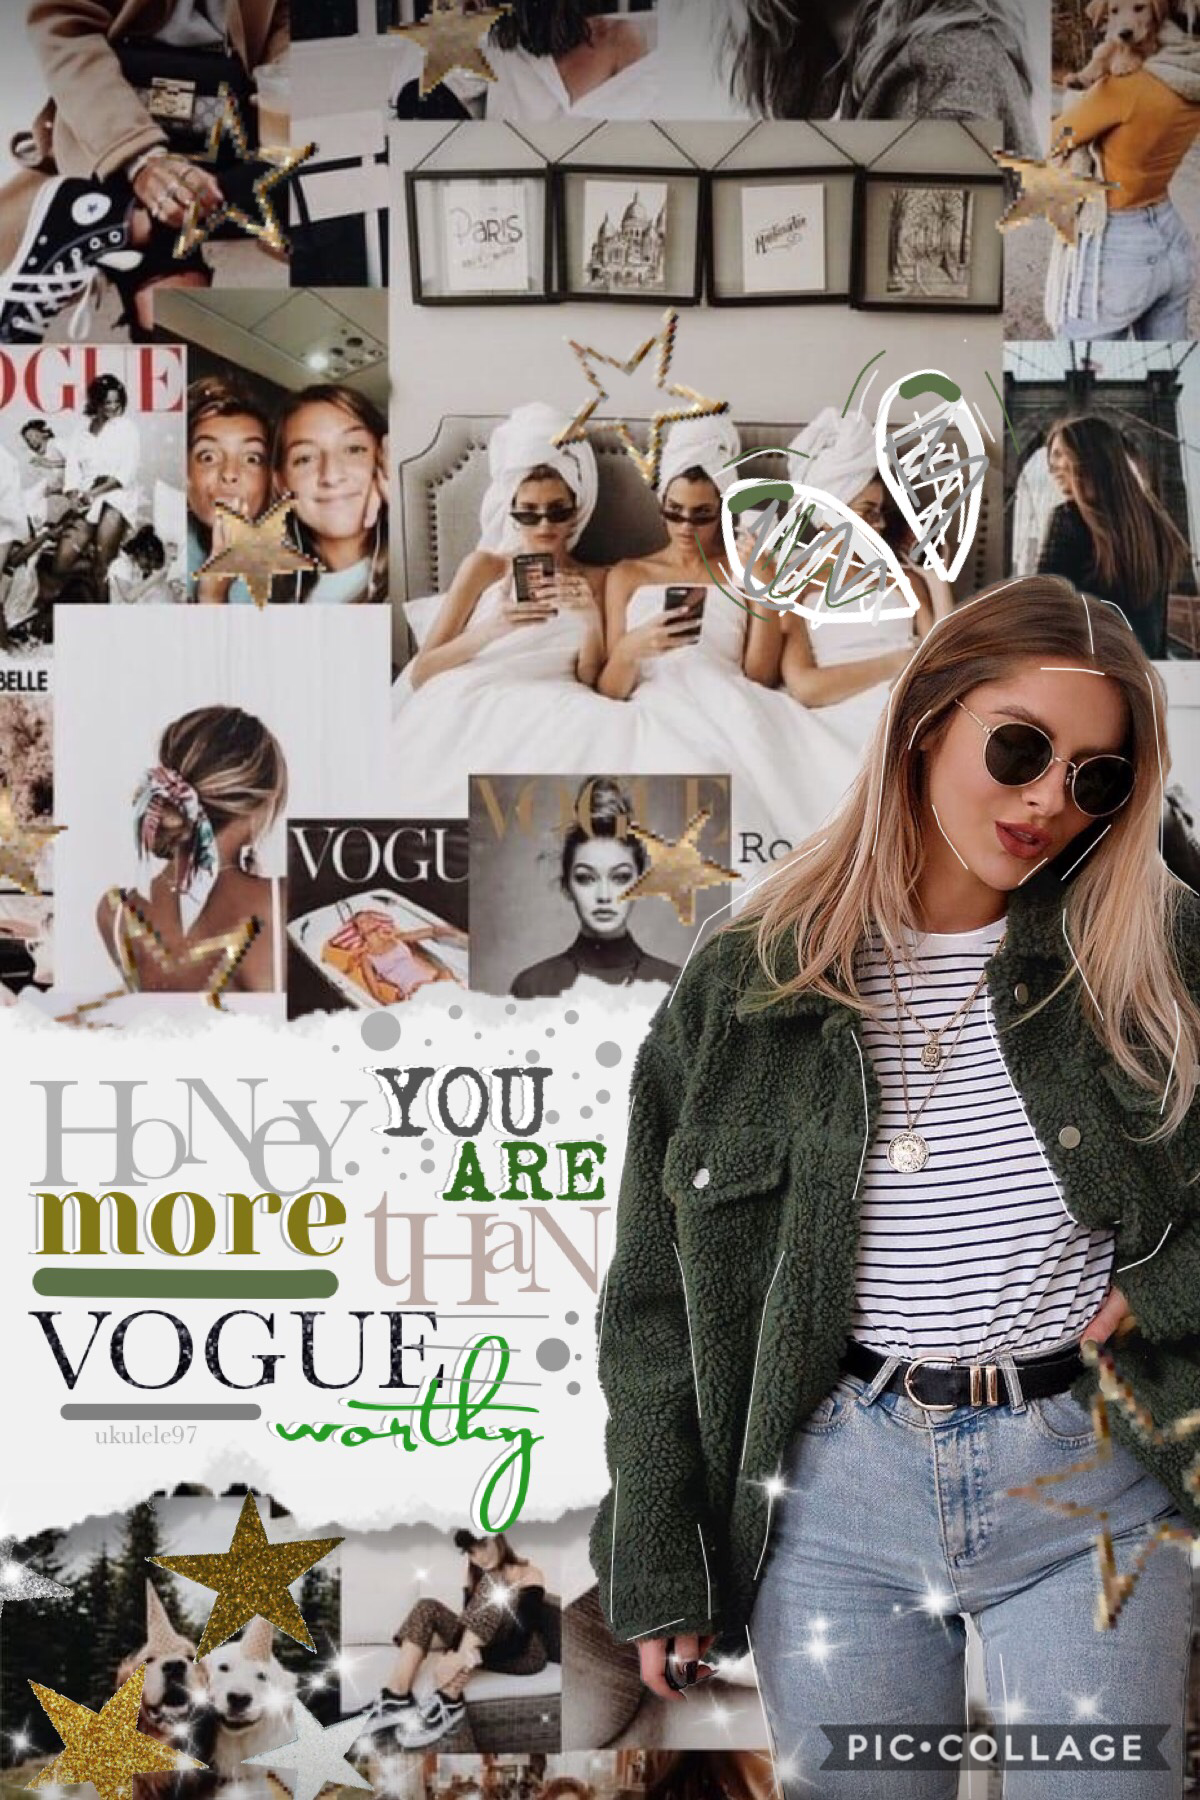 Tappy ⭐️ 2.4.19.

My first girl power collage 💥! I mean it seems like it’s not girl power but it reminds all of you that you all are beautiful and VOGUE worthy. QOTD: Current book your reading? AOTD: Trials of Apollo #3